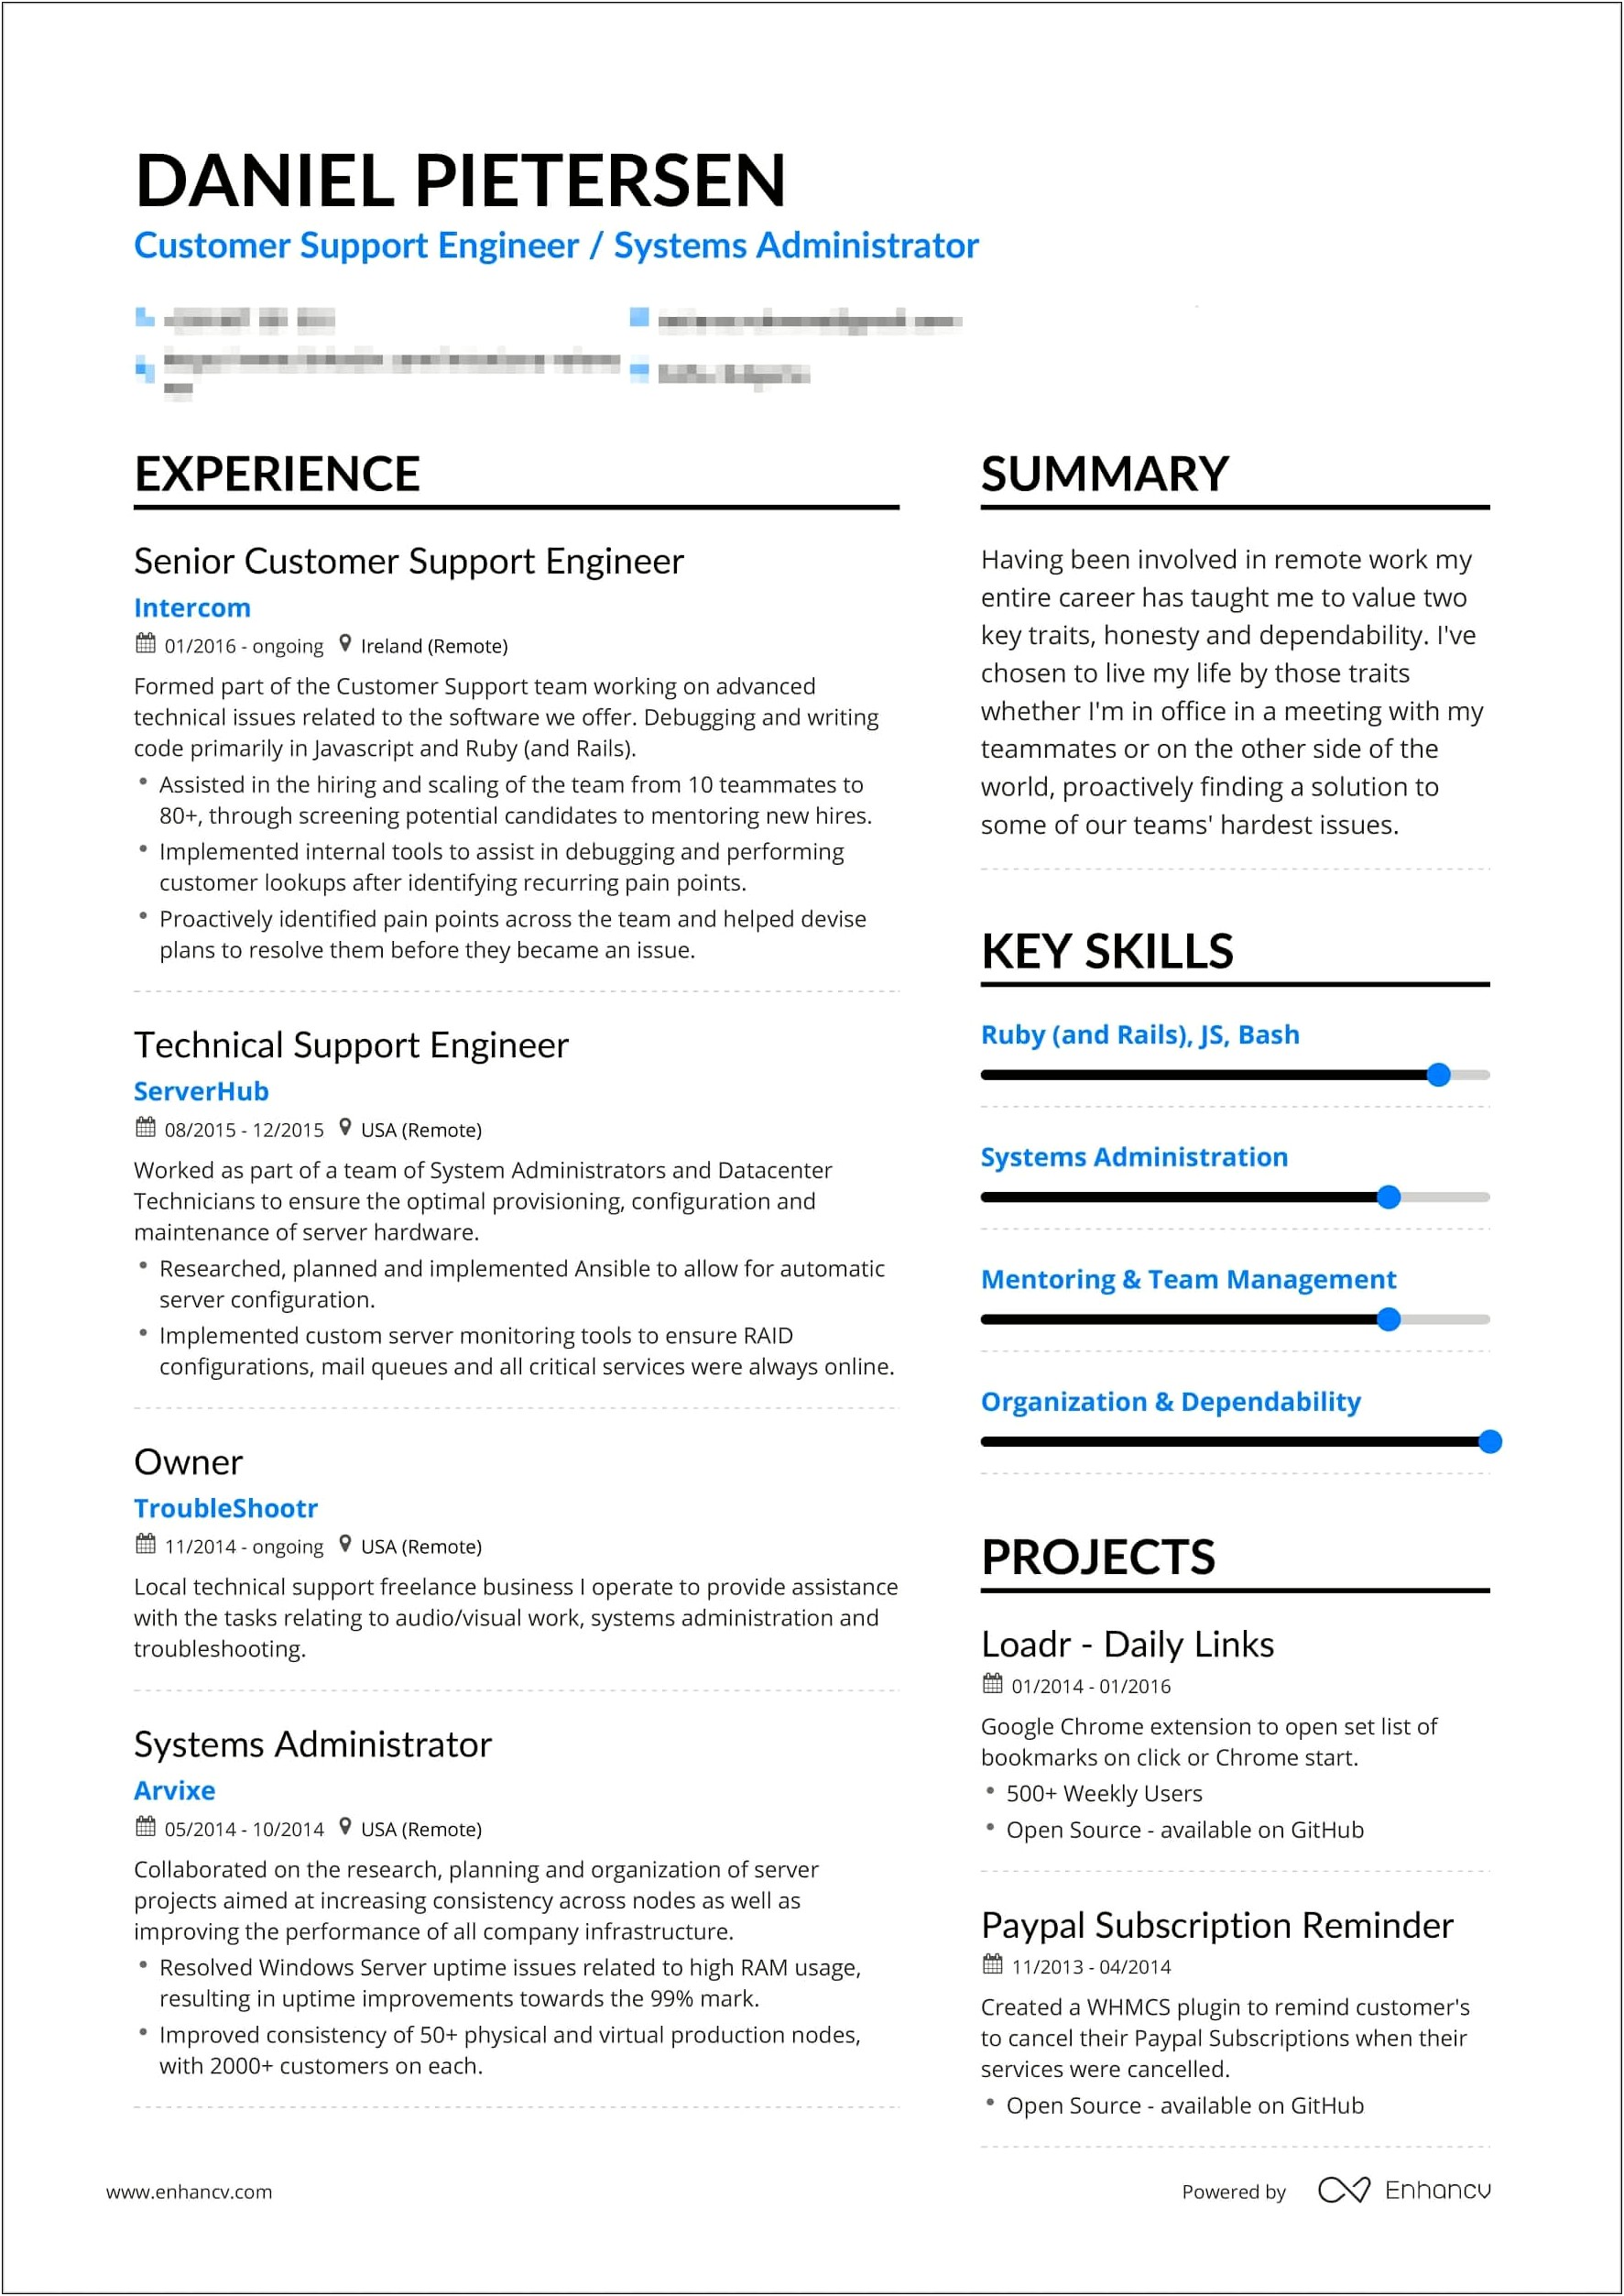 Resume Summary Statements About Personal Values And Traits